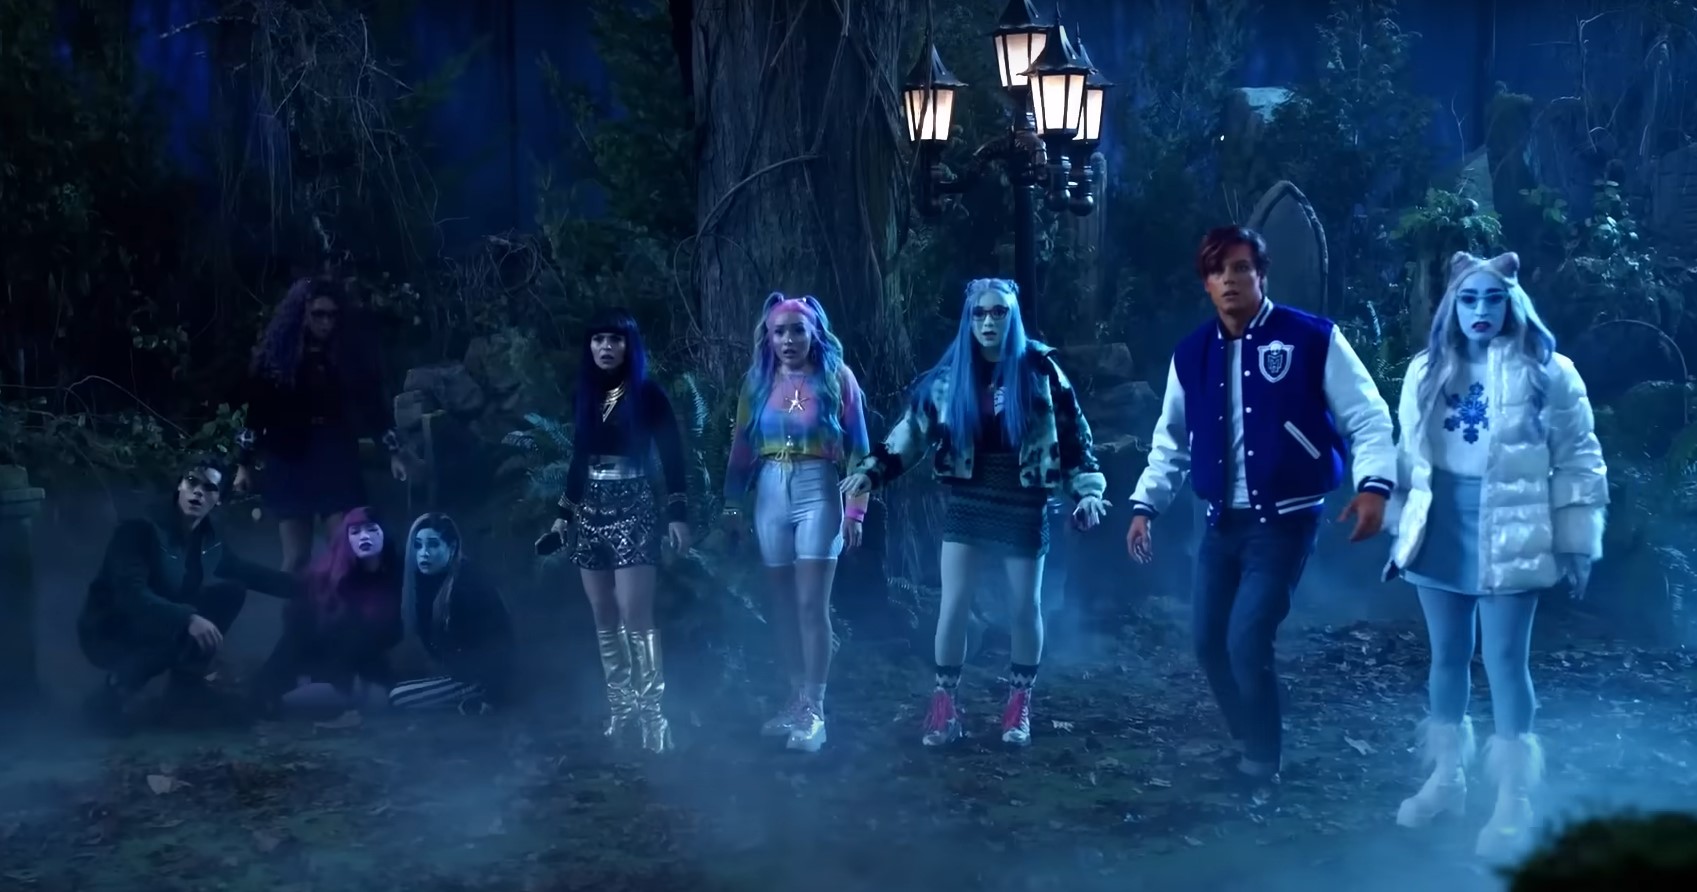 Monster High Movie Review - A Cute Monster Mash for Tweens